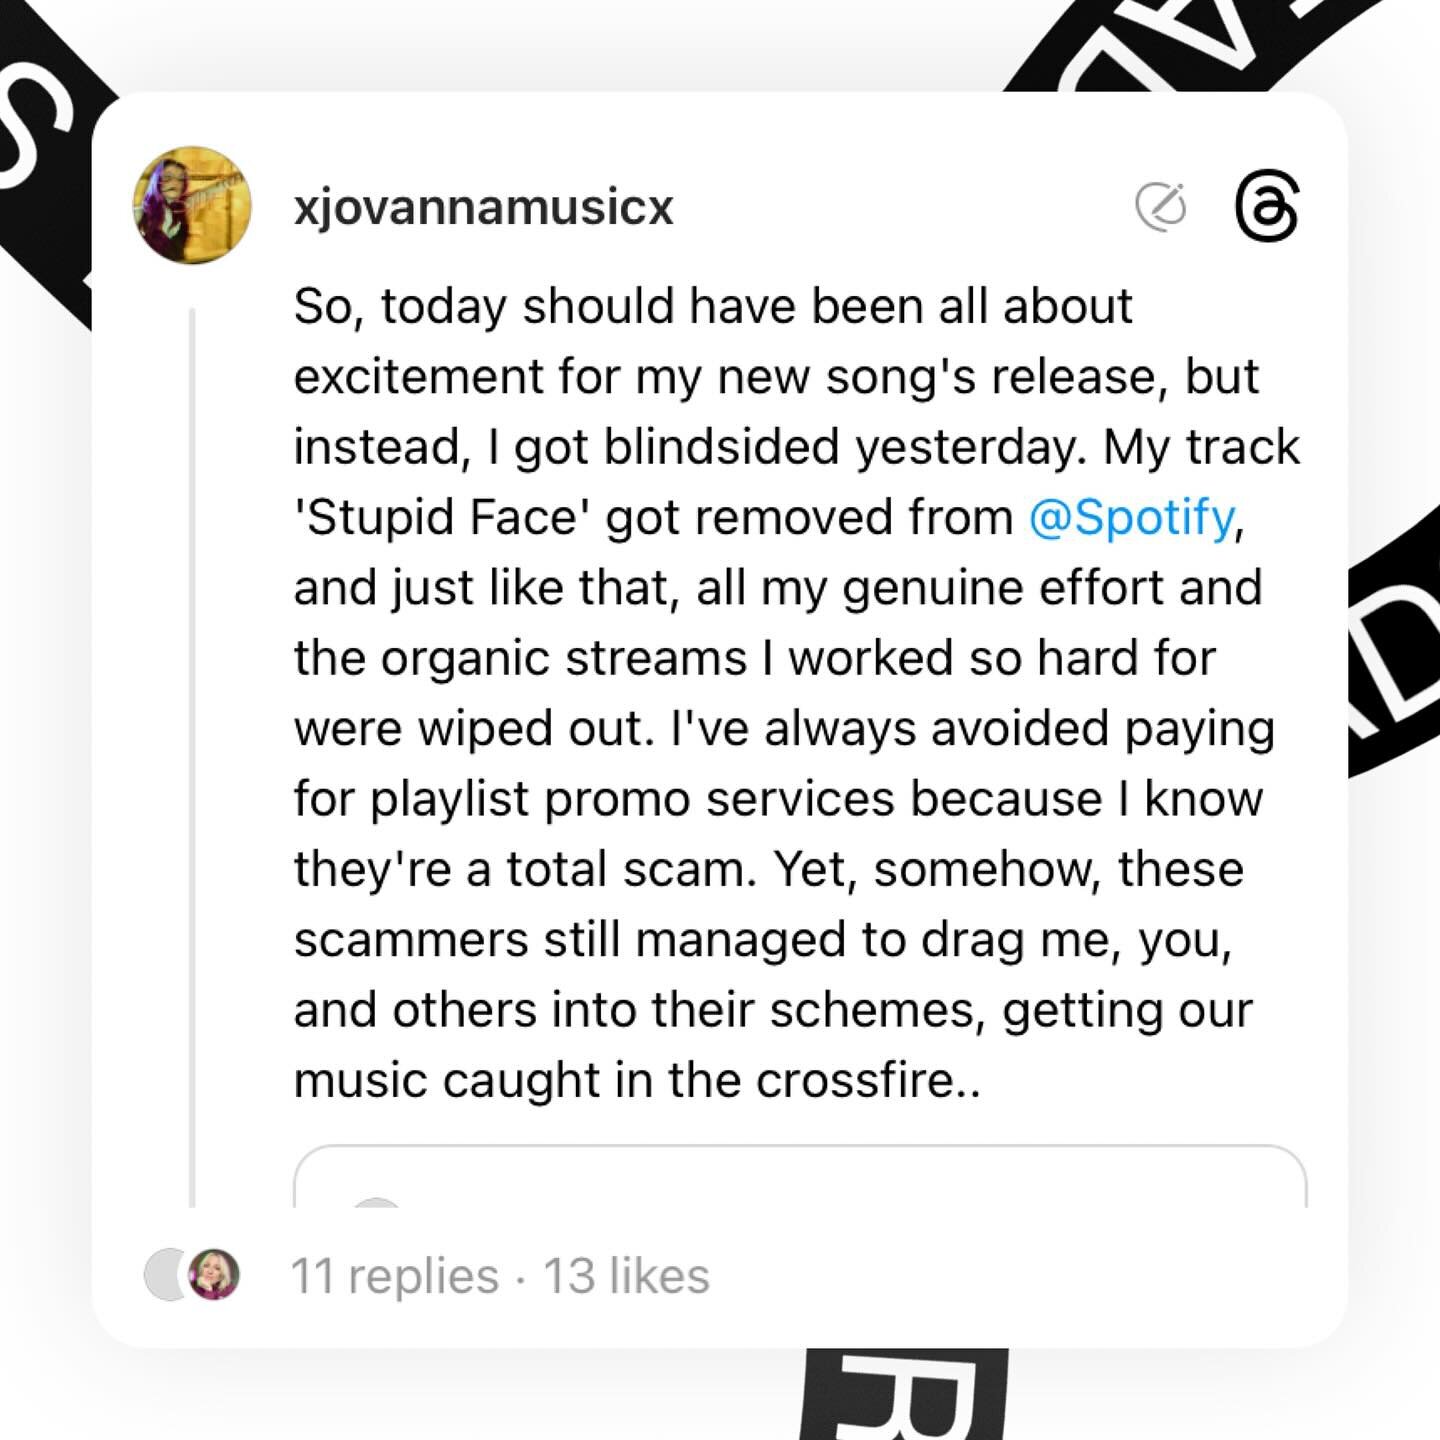 I want to talk about an important issue in the music community: &ldquo;artificial streaming.&rdquo; My music, along with many other indie artists&rsquo;, has been wrongly taken down due to it. These third-party promotional services offer &ldquo;strea